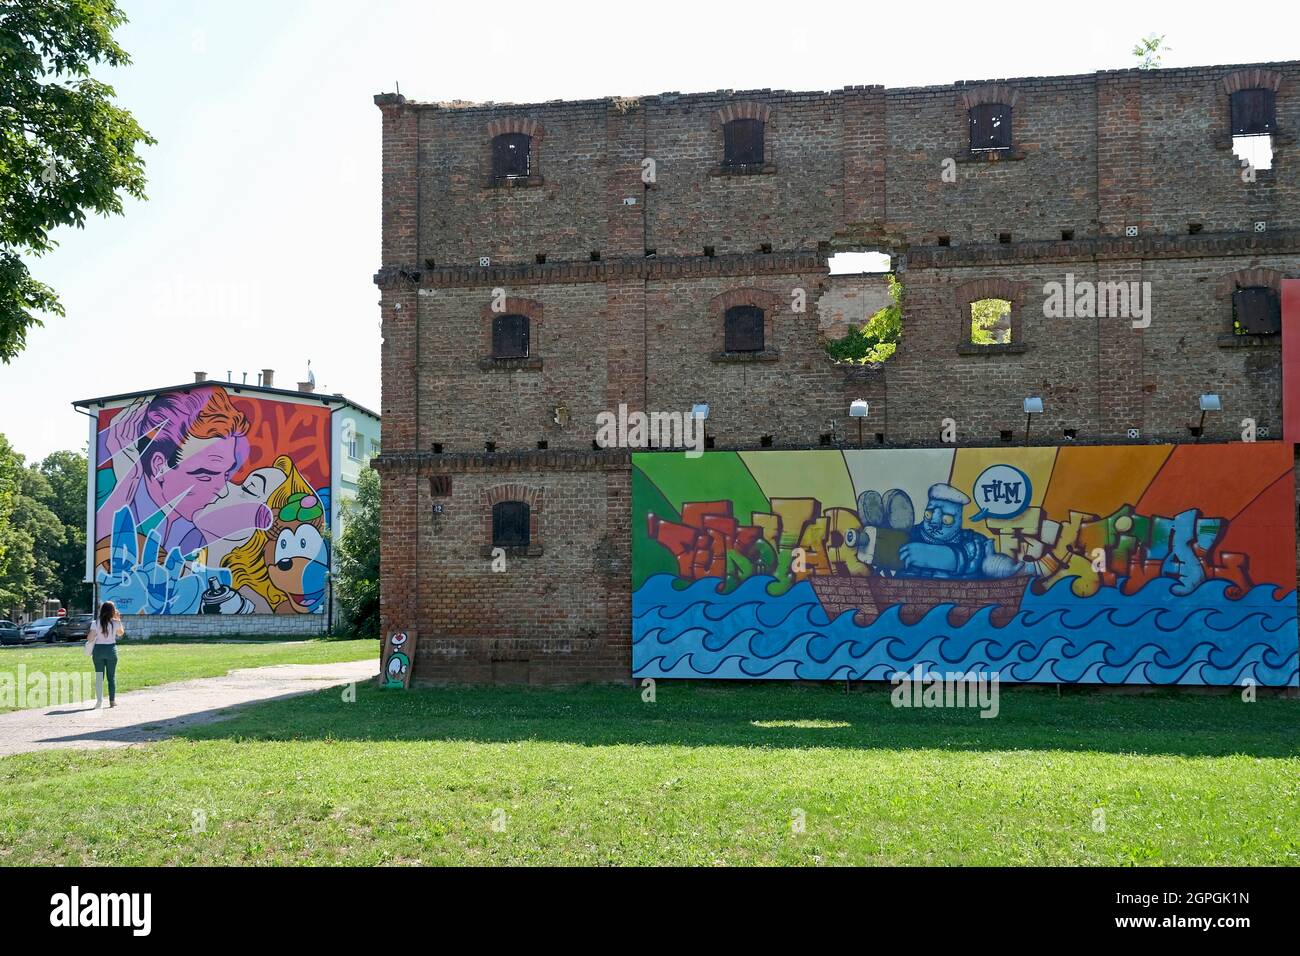 Croatia, Slavonia, Vukovar, street art on a ruined building destroyed during the Battle of Vukovar in 1991 Stock Photo